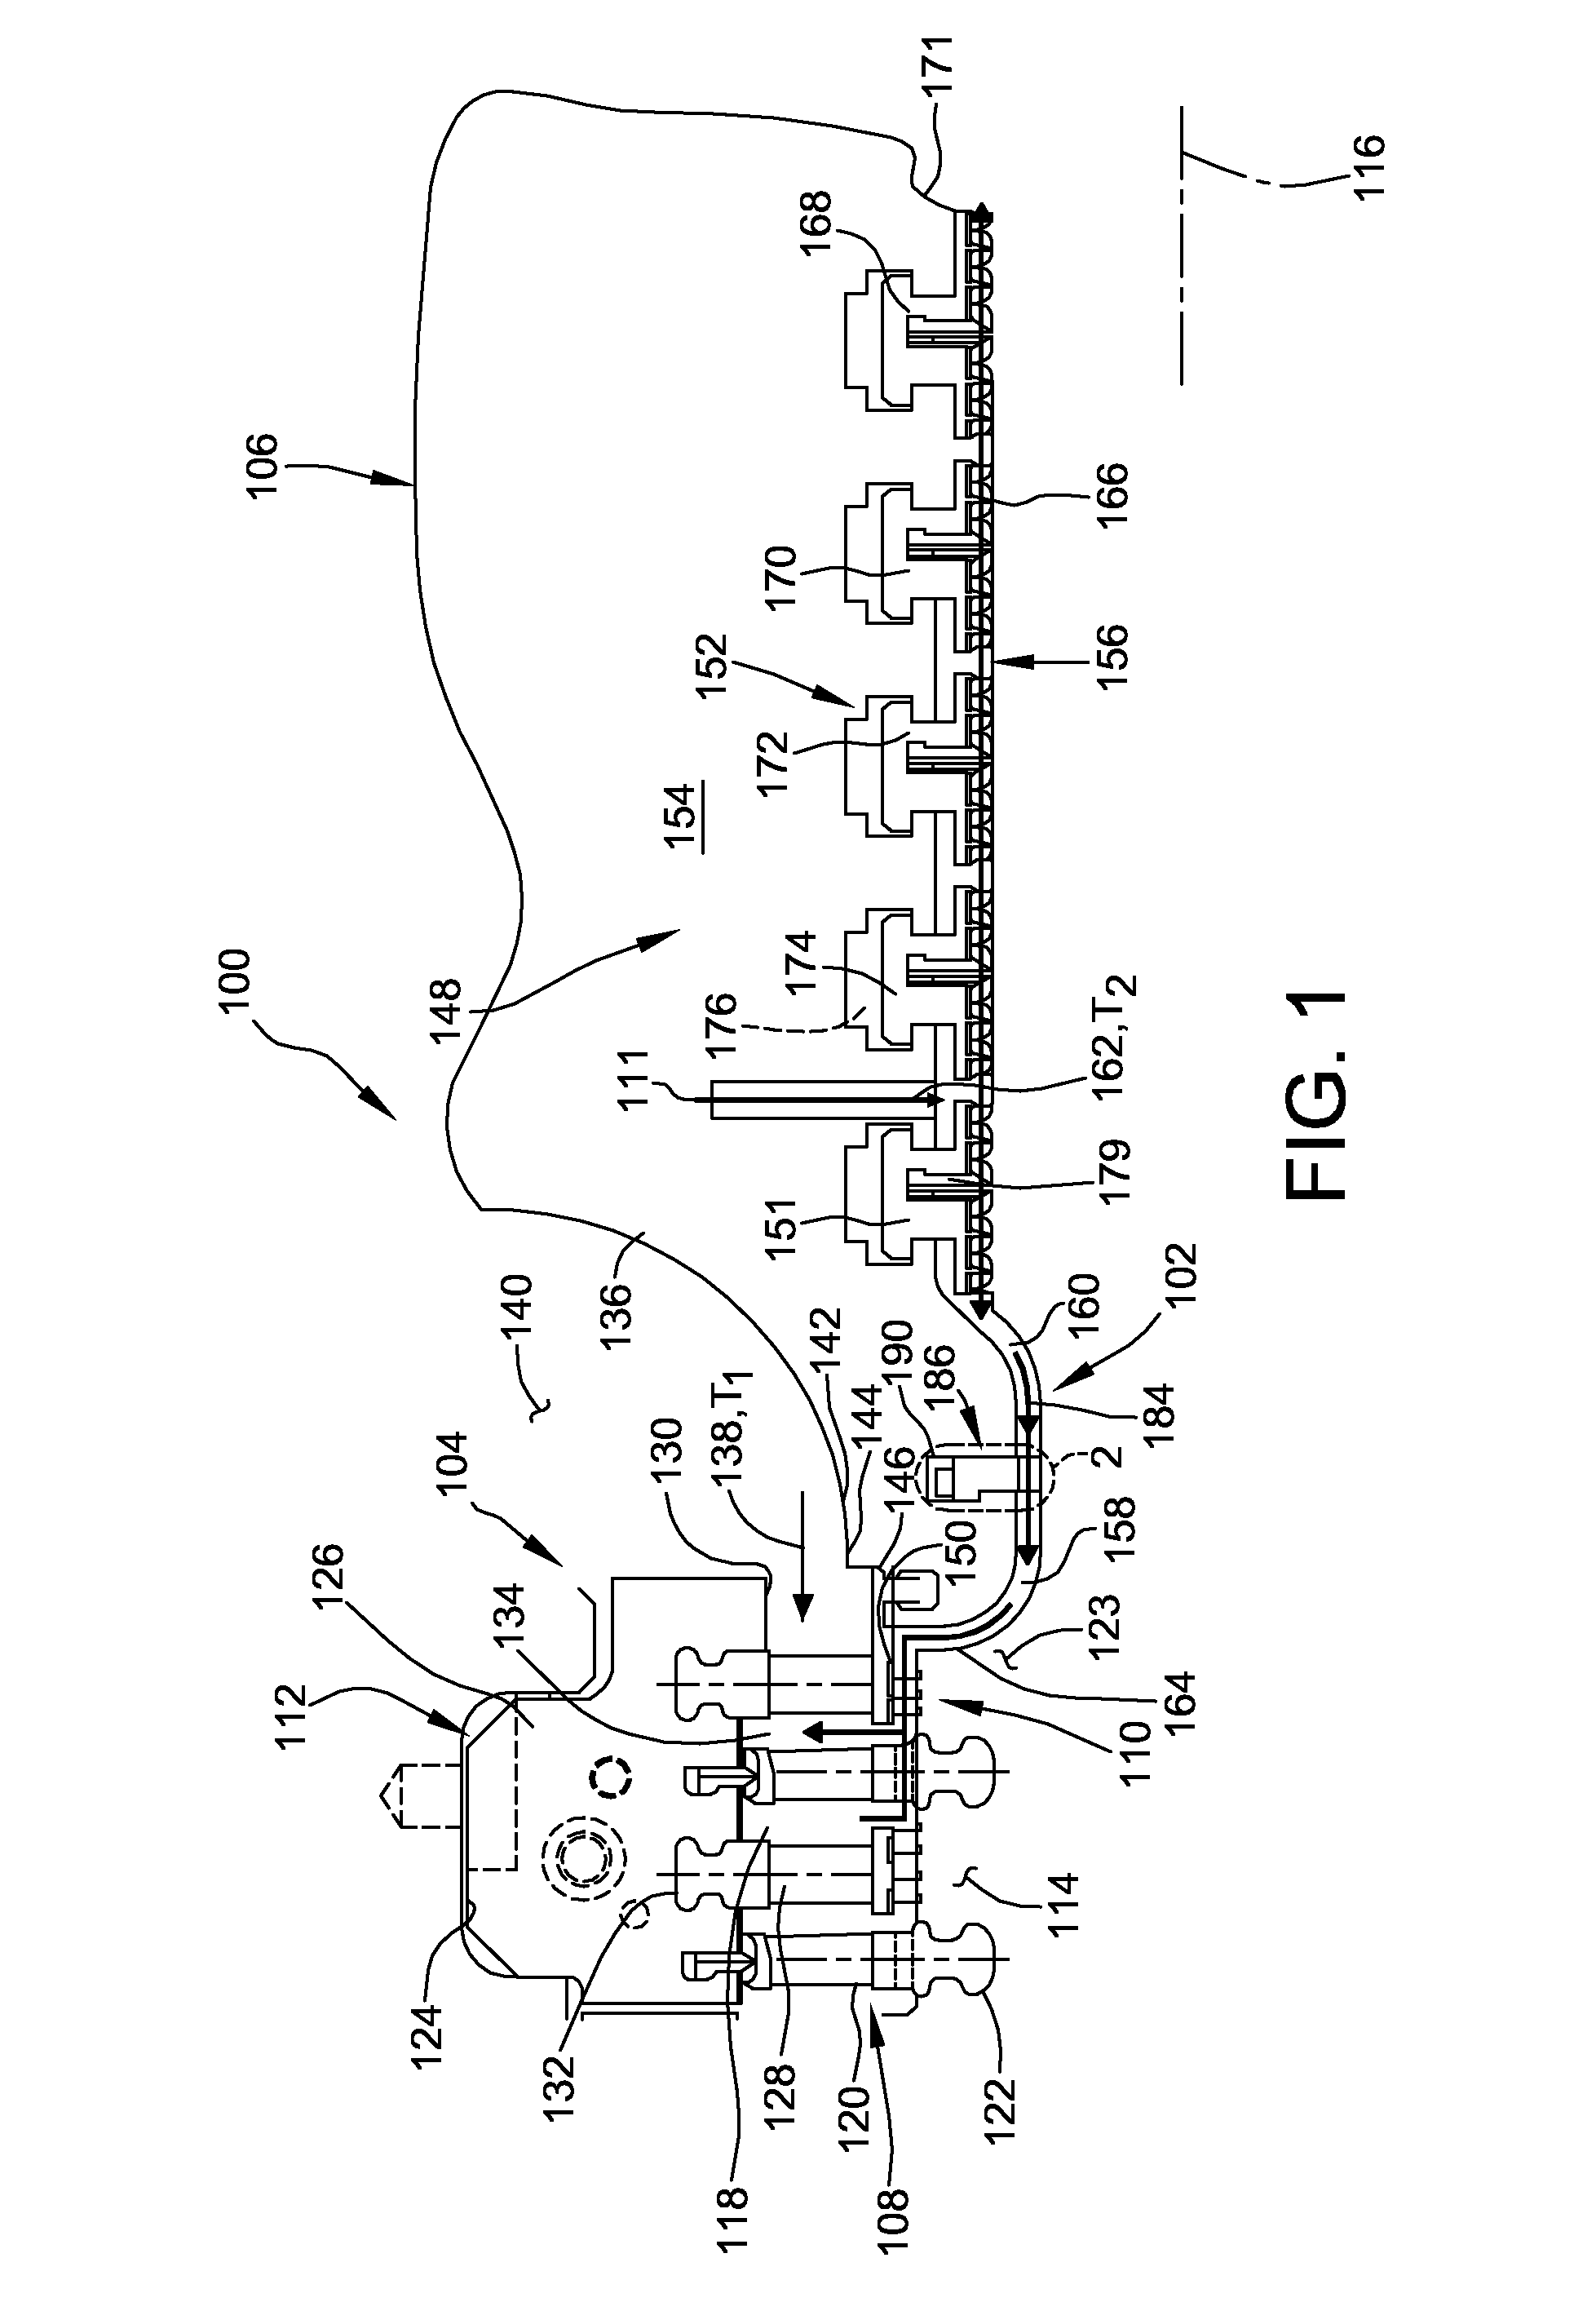 Steam turbine and methods of assembling the same